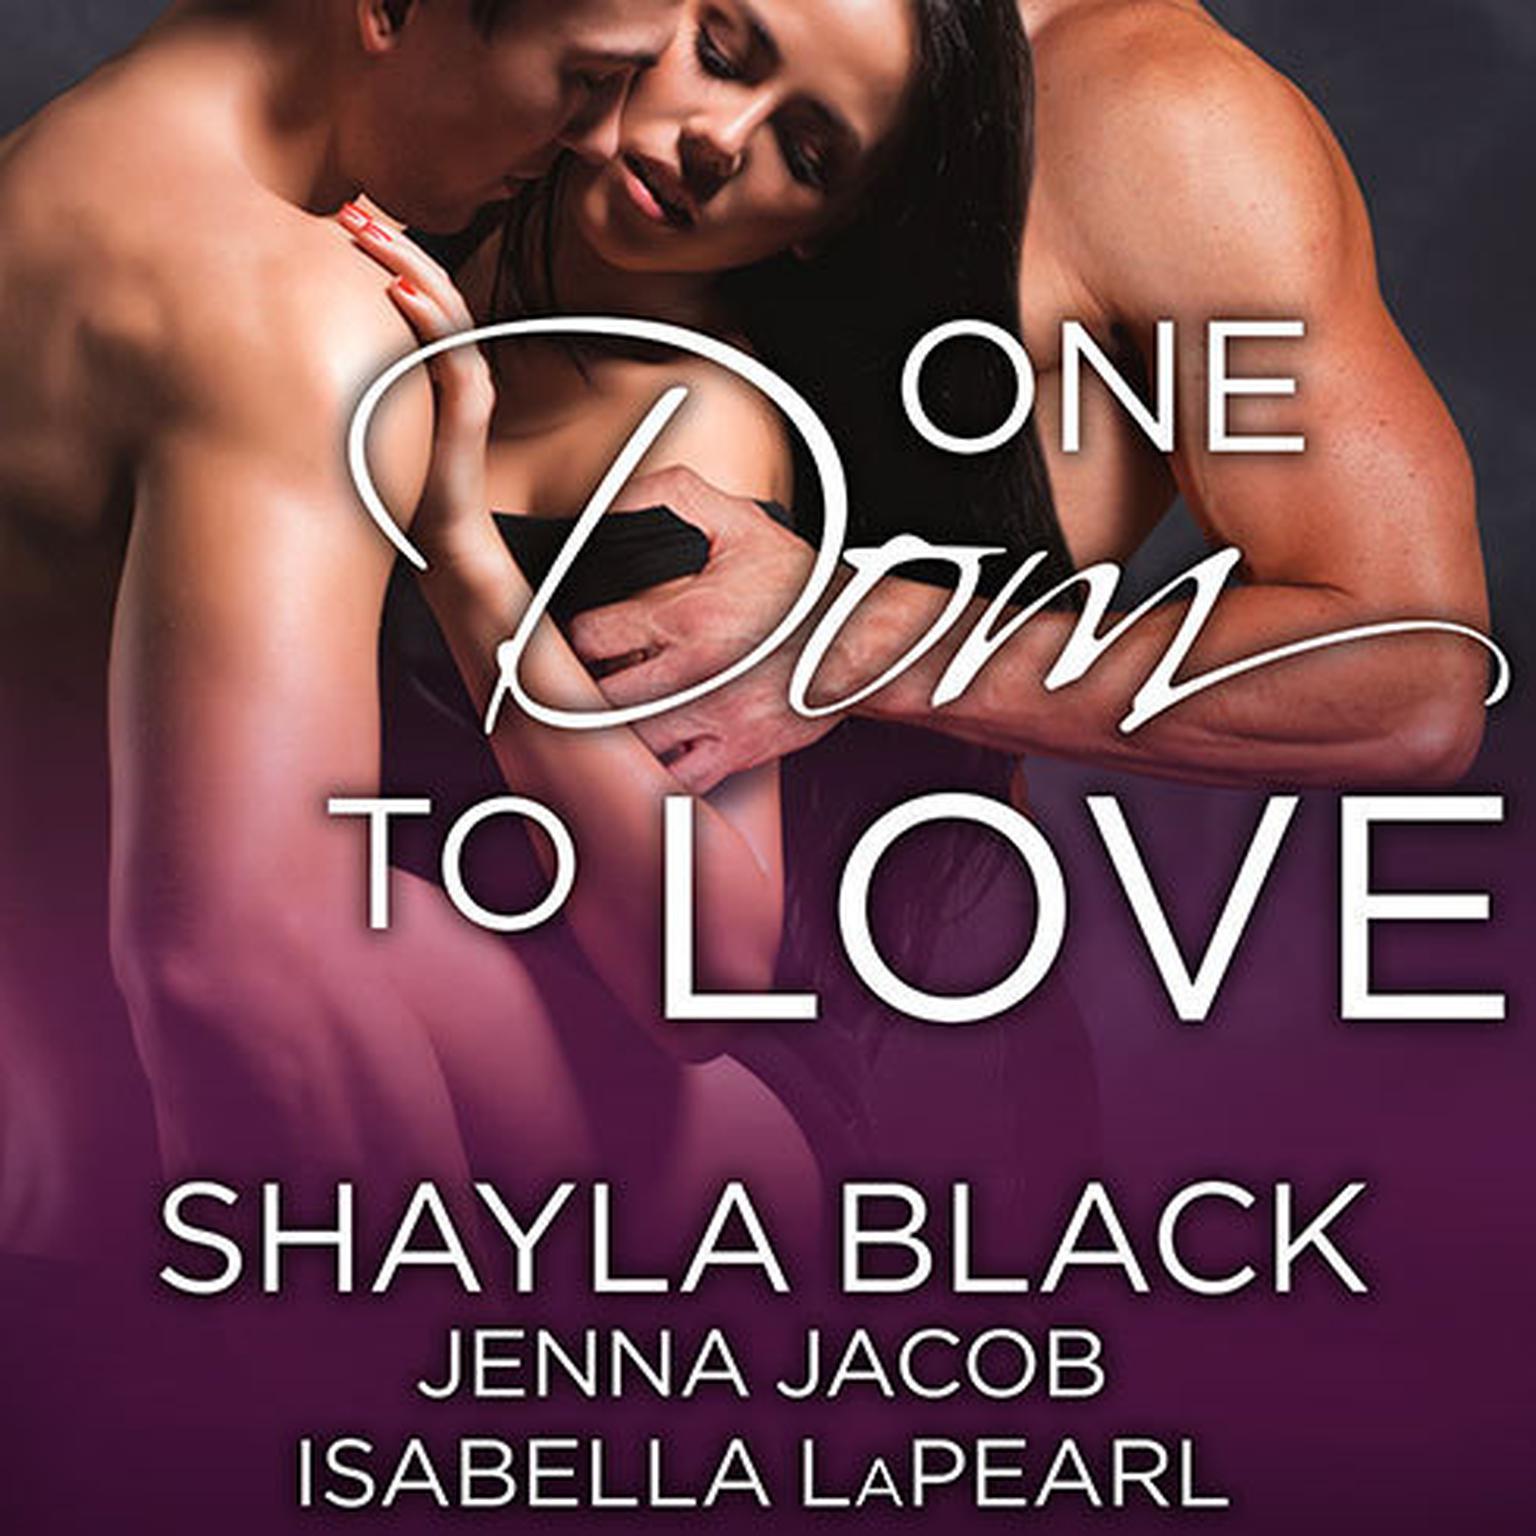 One Dom to Love Audiobook, by Shayla Black